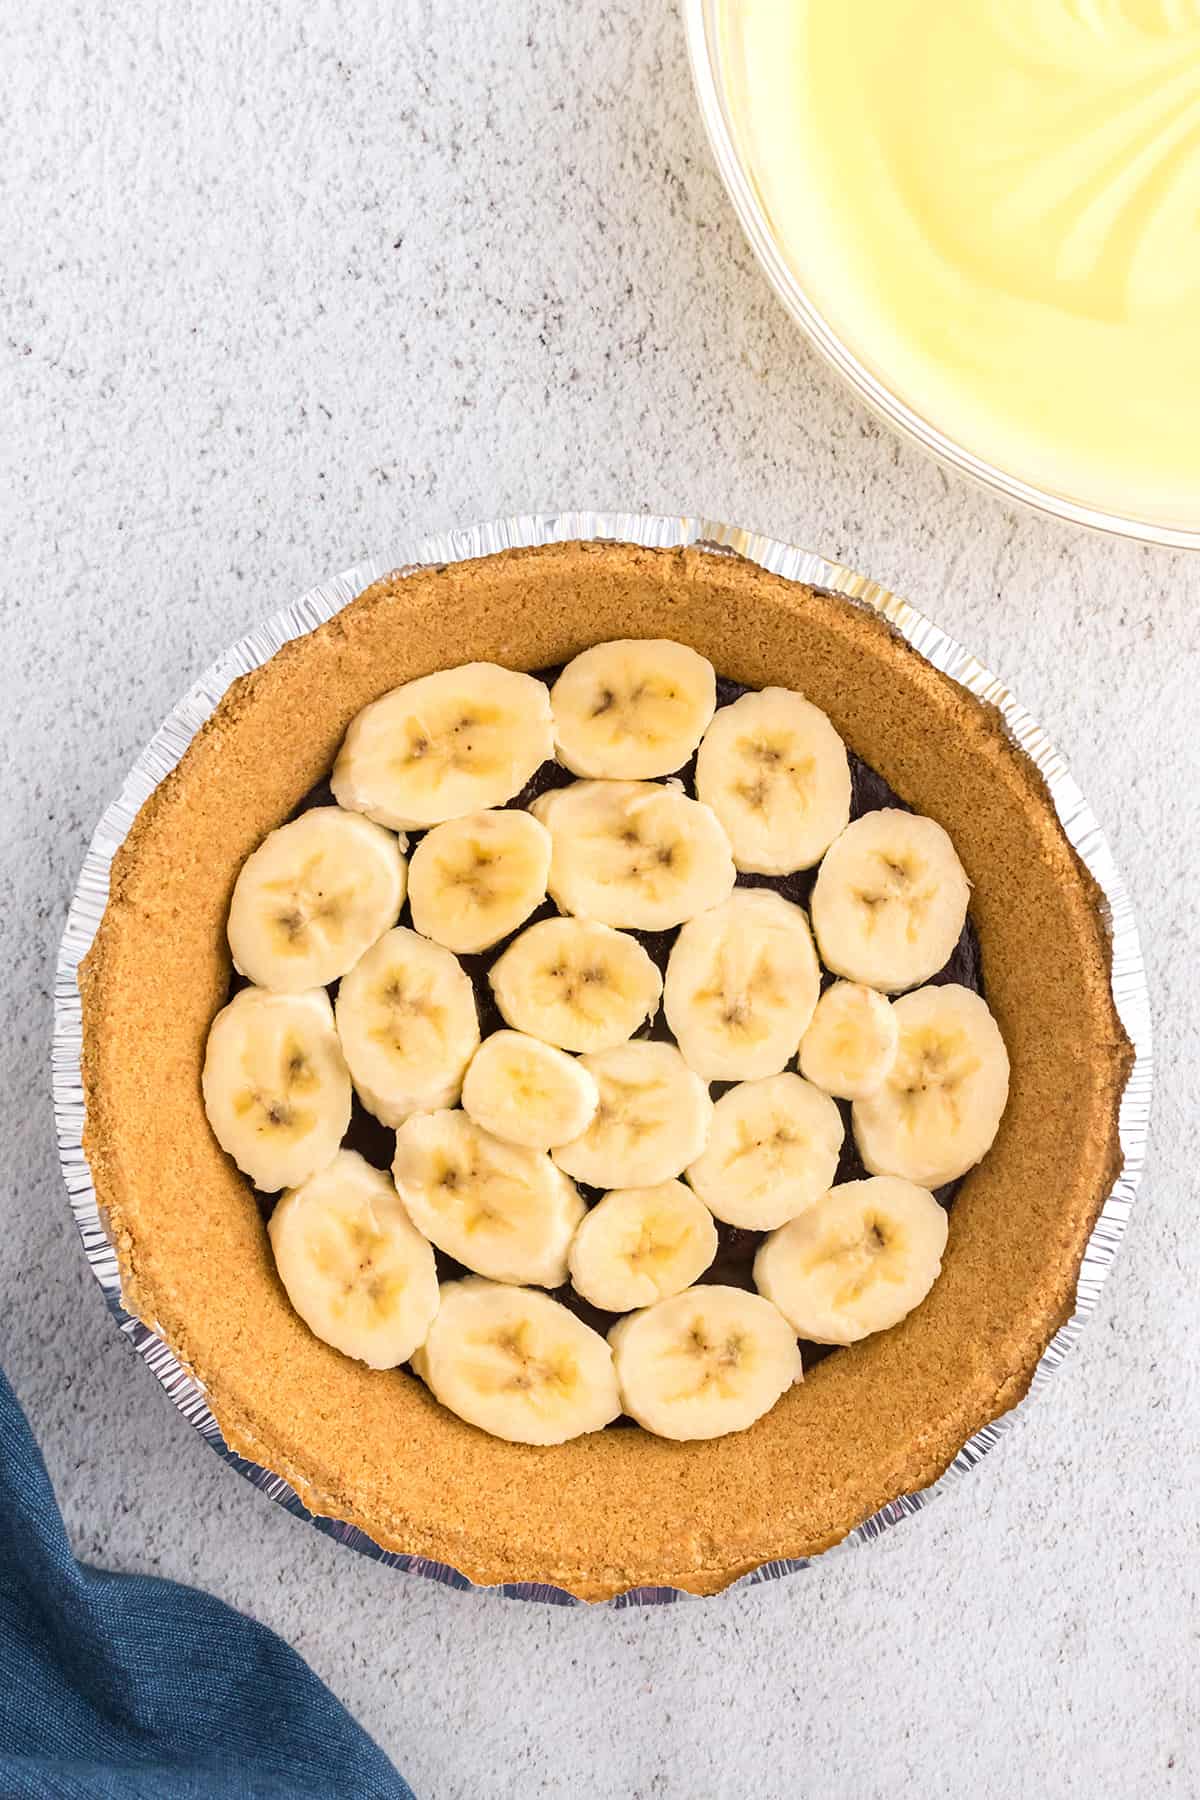 Banana slices layered in a pie crust.